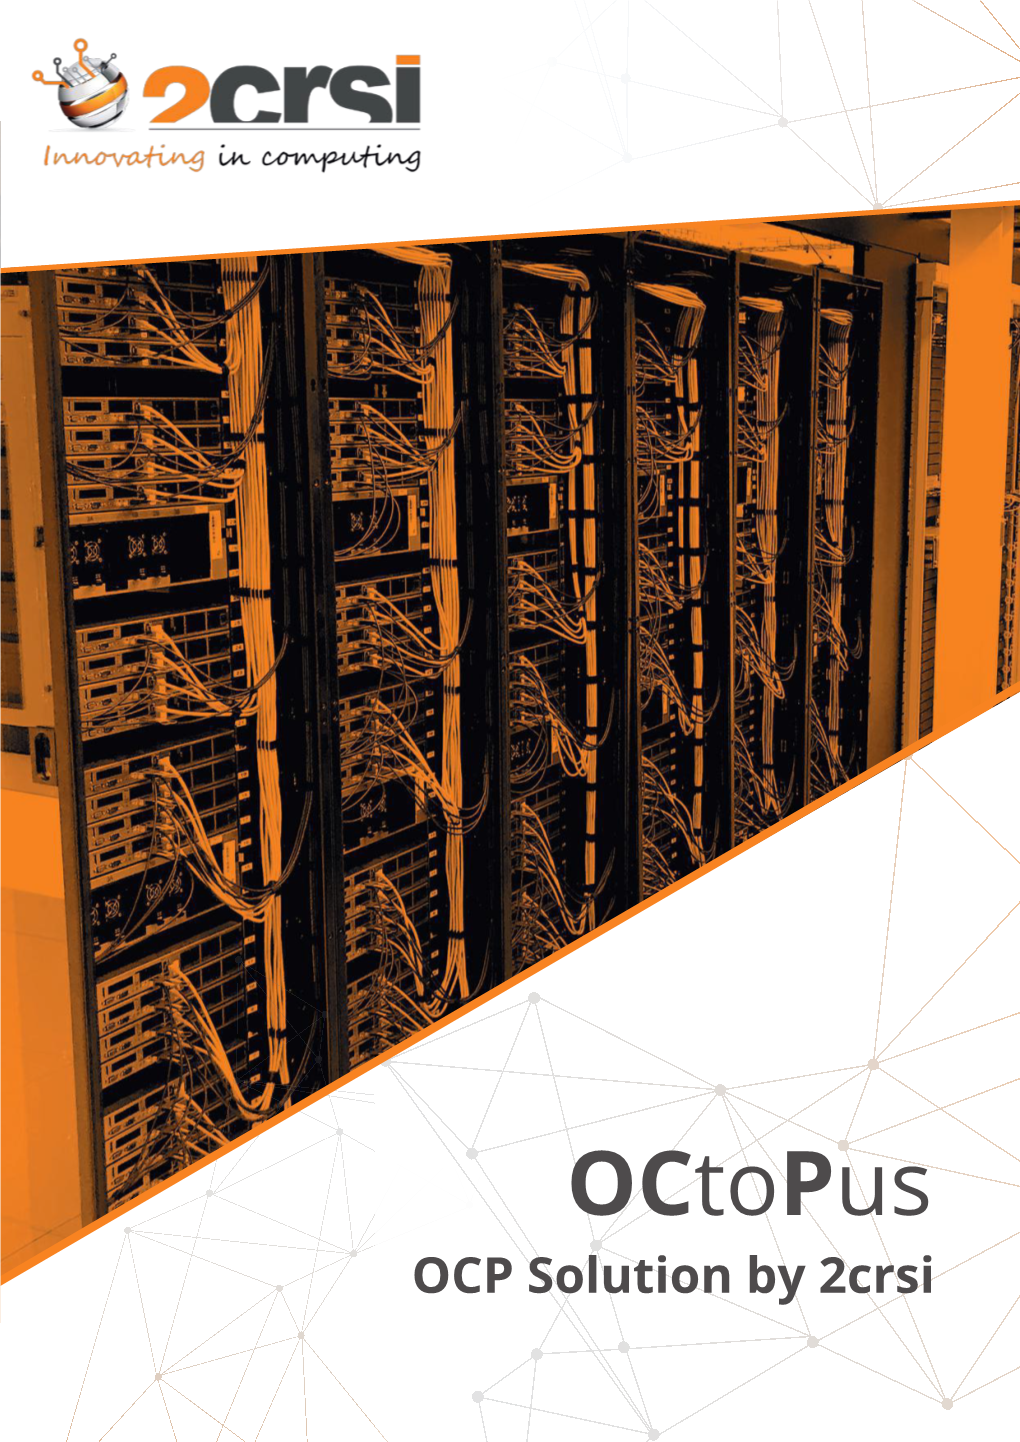 Octopus Solution About 2Crsi Technical Specifications Octopus Servers